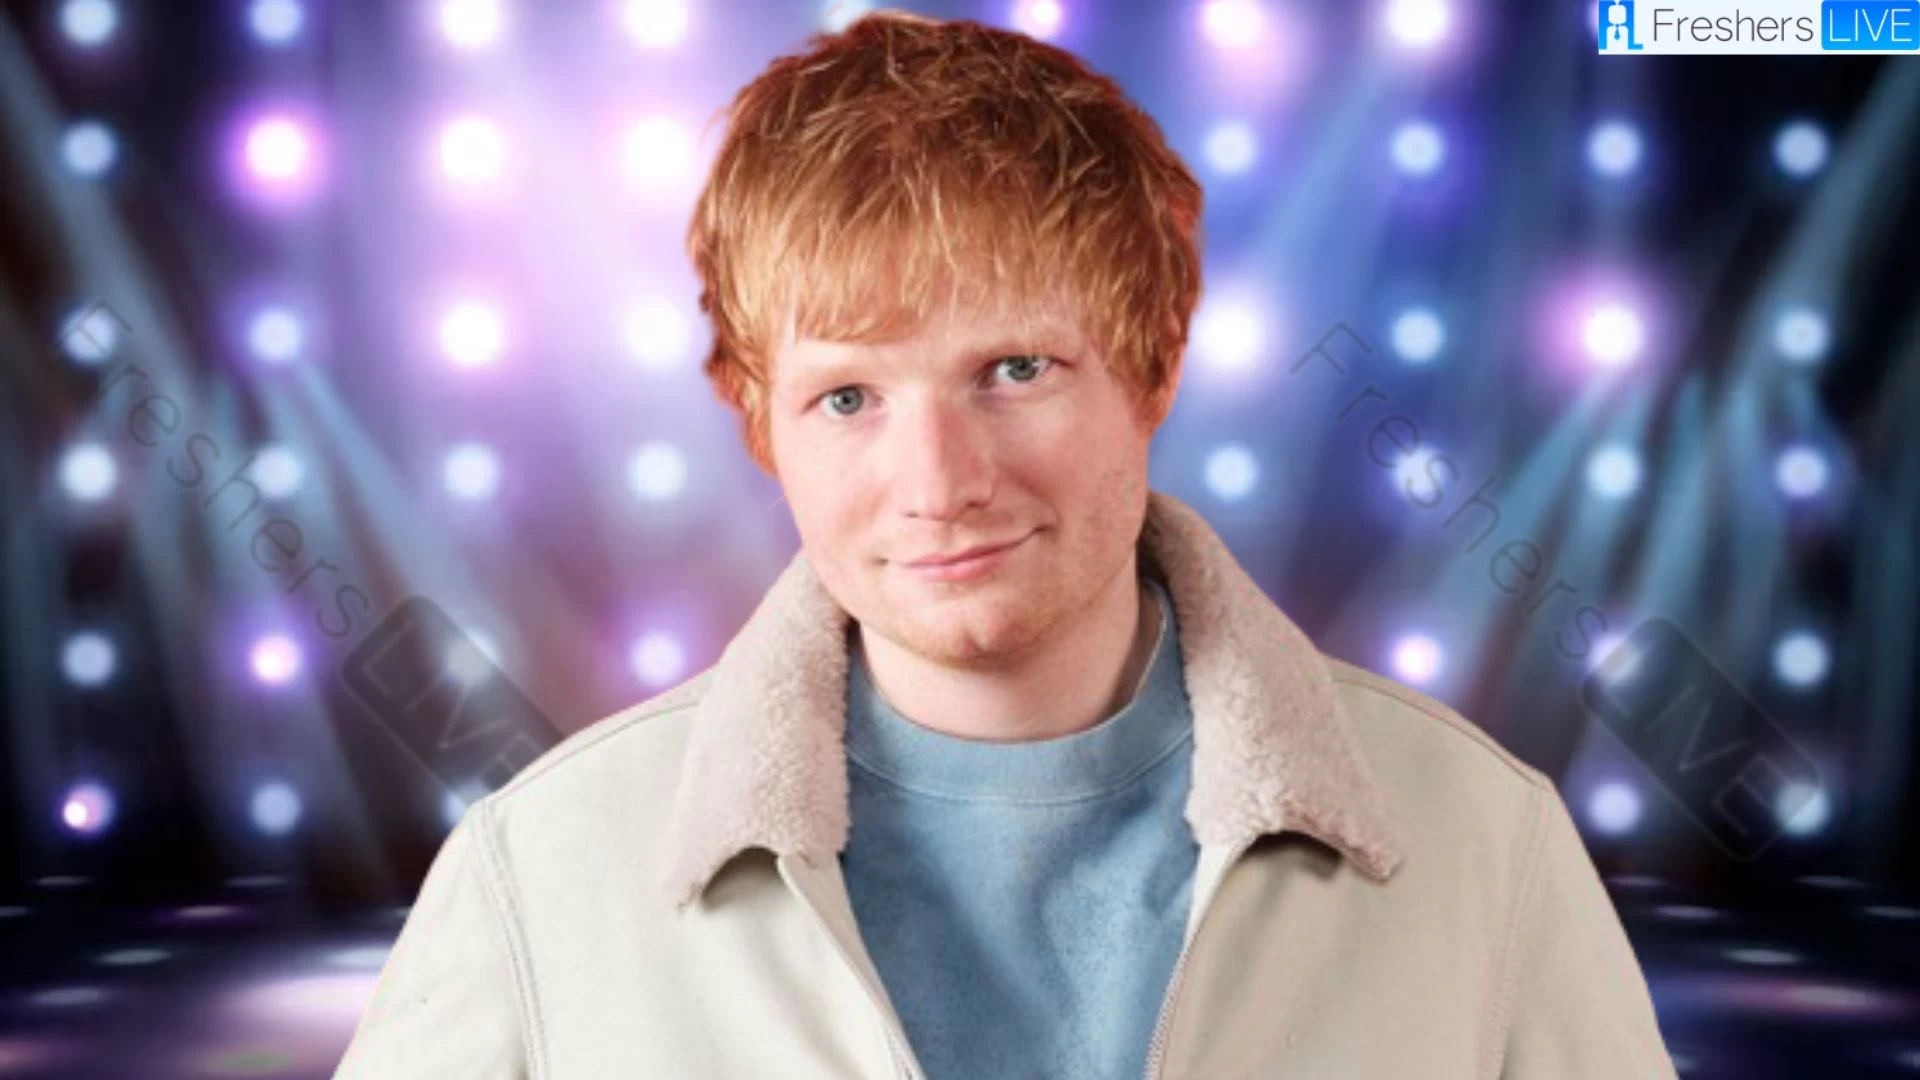 "Ed Sheeran Serenades Hearts with Soulful New Track 'When Will I Be Alright'"